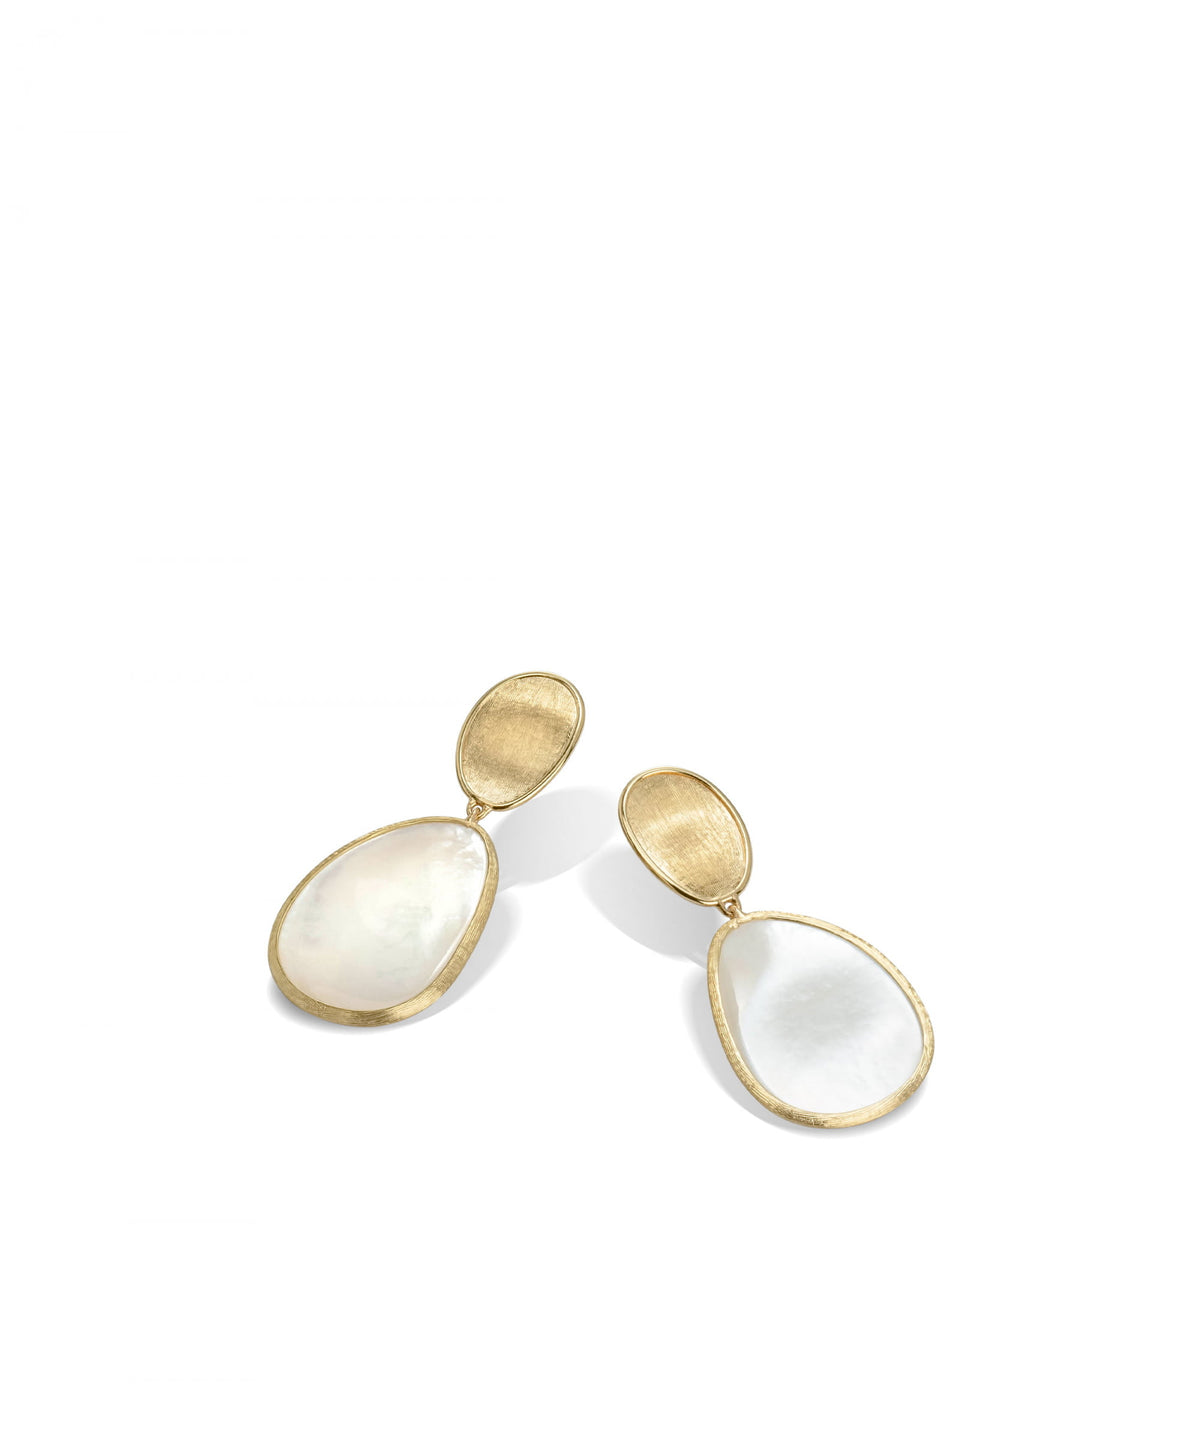 Lunaria Earrings in 18k Yellow Gold with Mother of Pearl Double Drop - Orsini Jewellers NZ